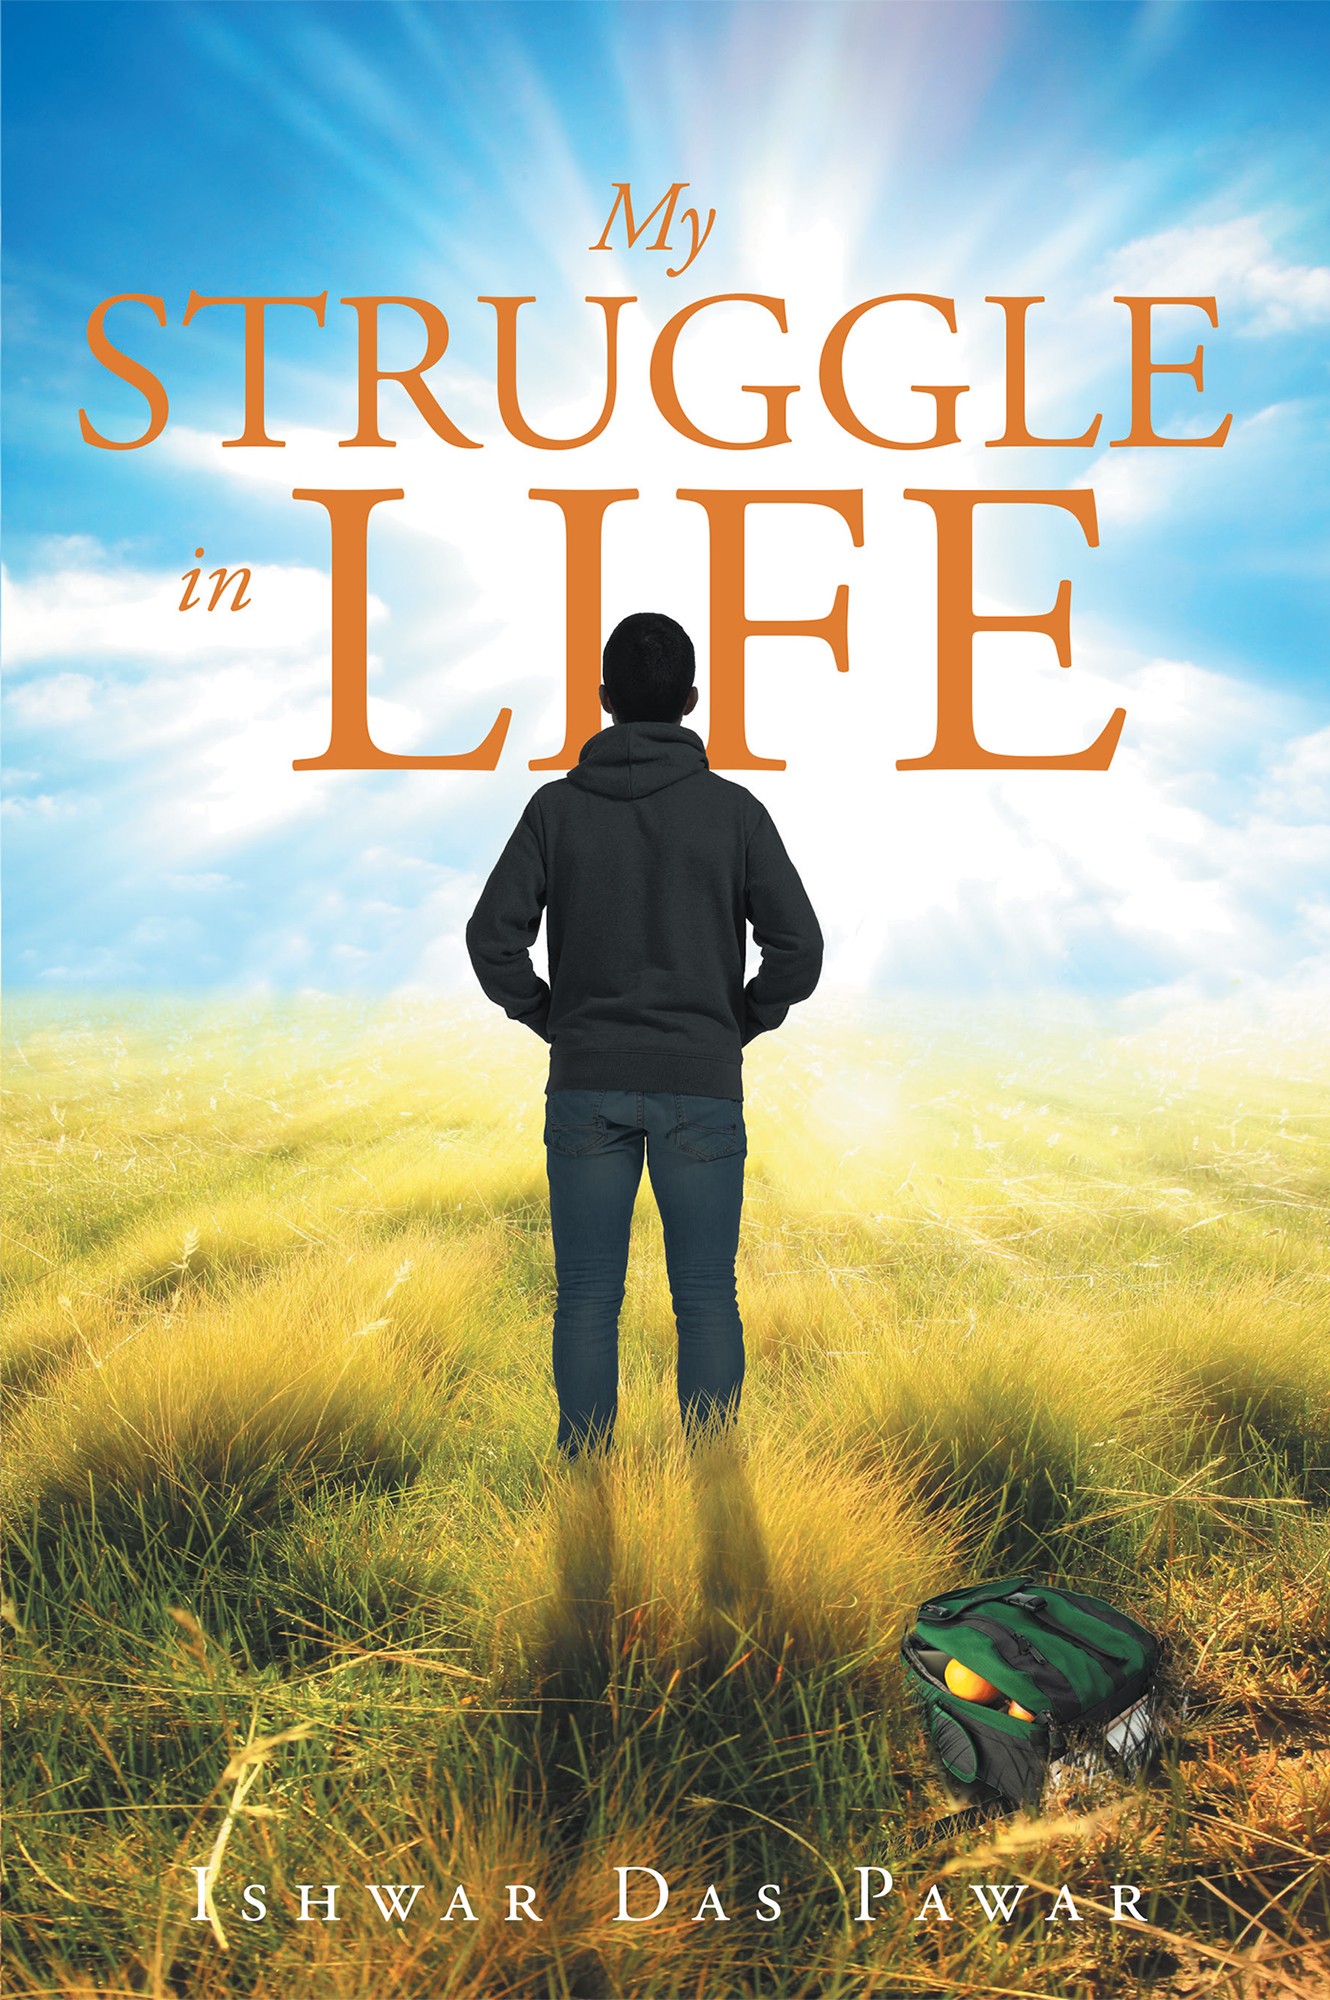 Ishwar Das Pawar’s Book “My Struggle in Life” is a Philosophical, In